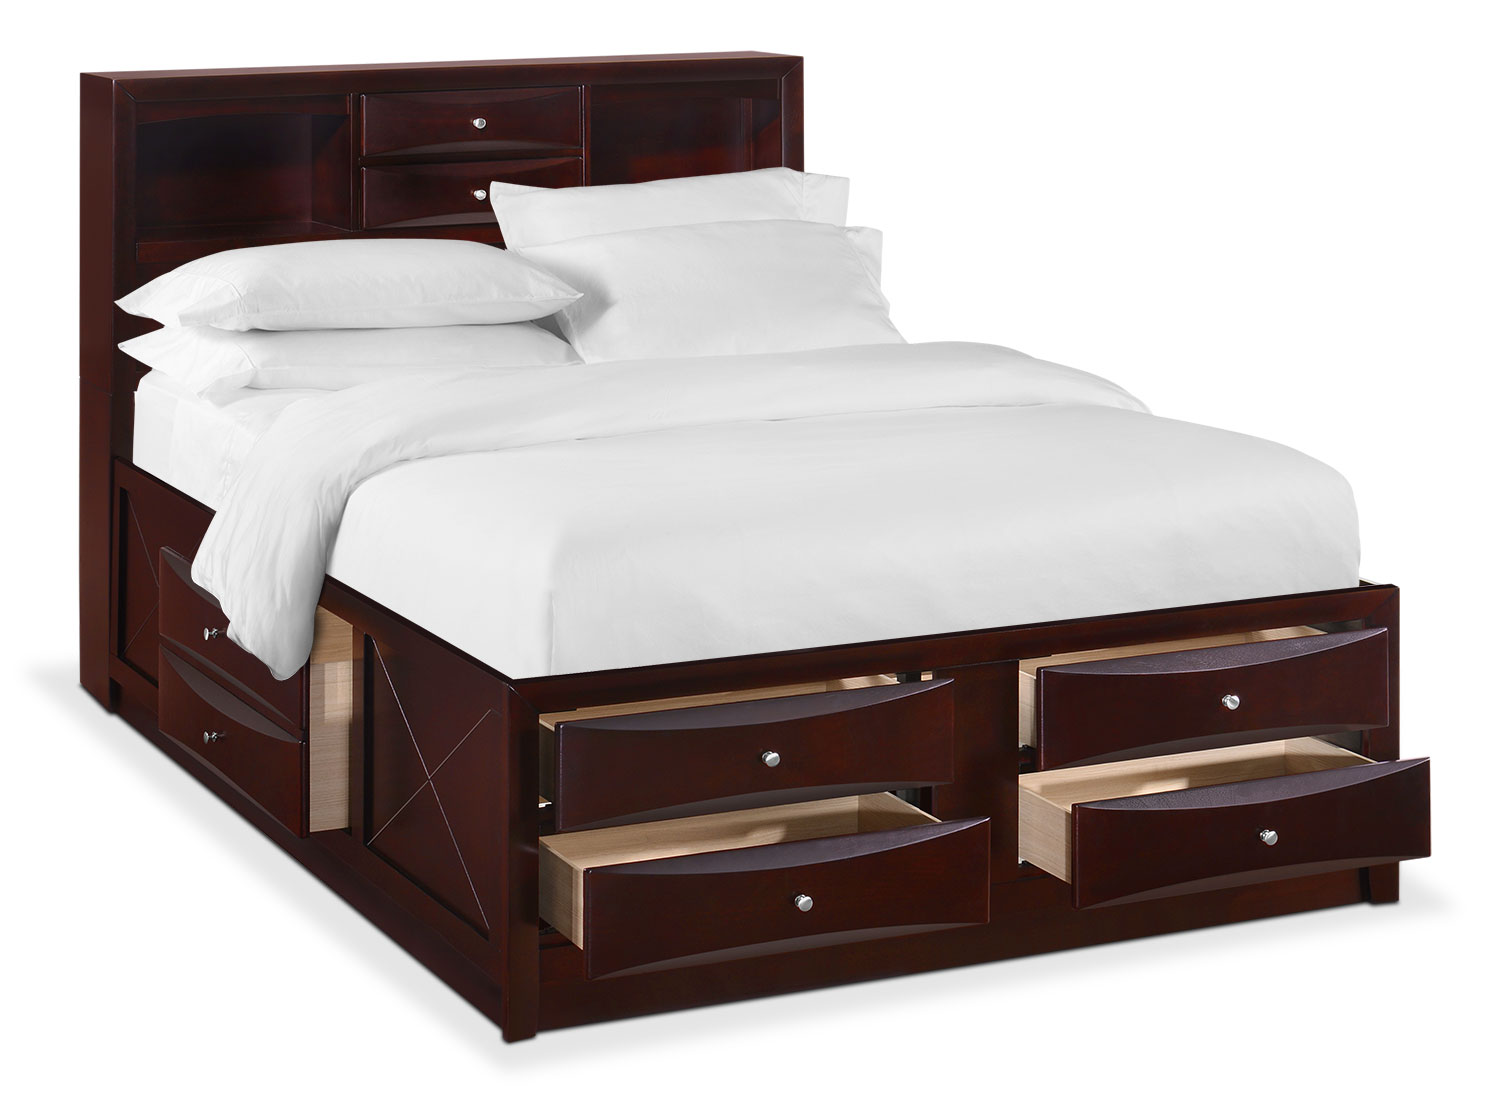 Braden Full Bookcase Bed with Storage - Merlot | Value City Furniture and Mattresses